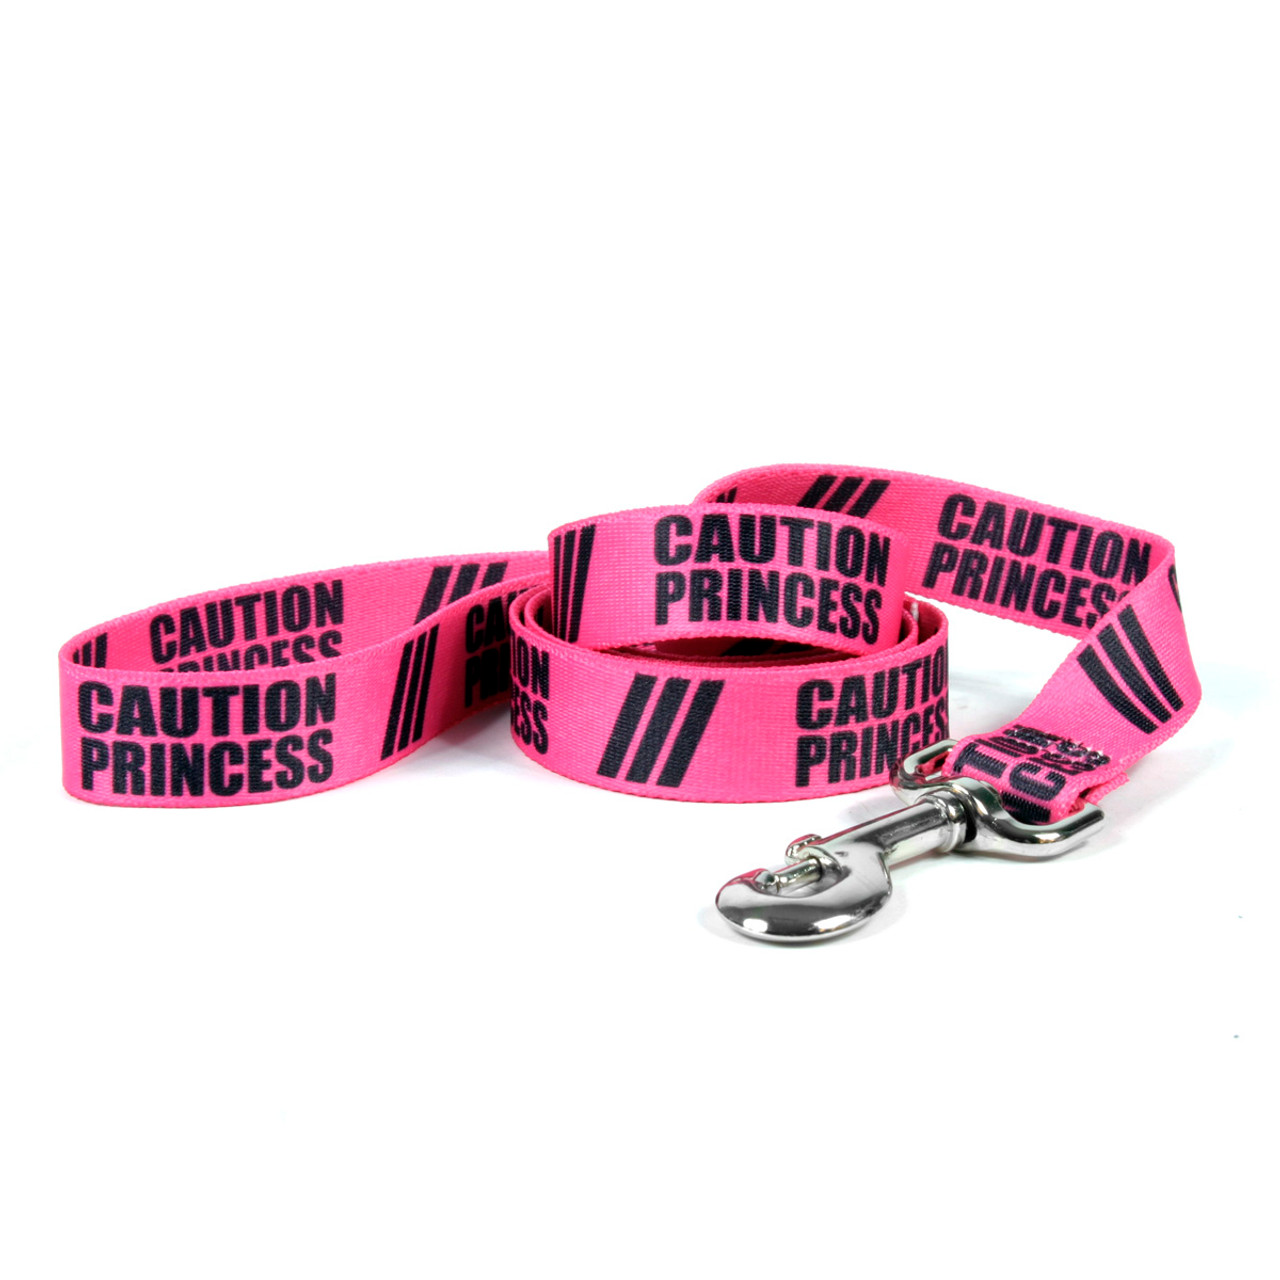 Caution Princess Dog Leash by Yellow Dog Design, Inc - Order Today at ...